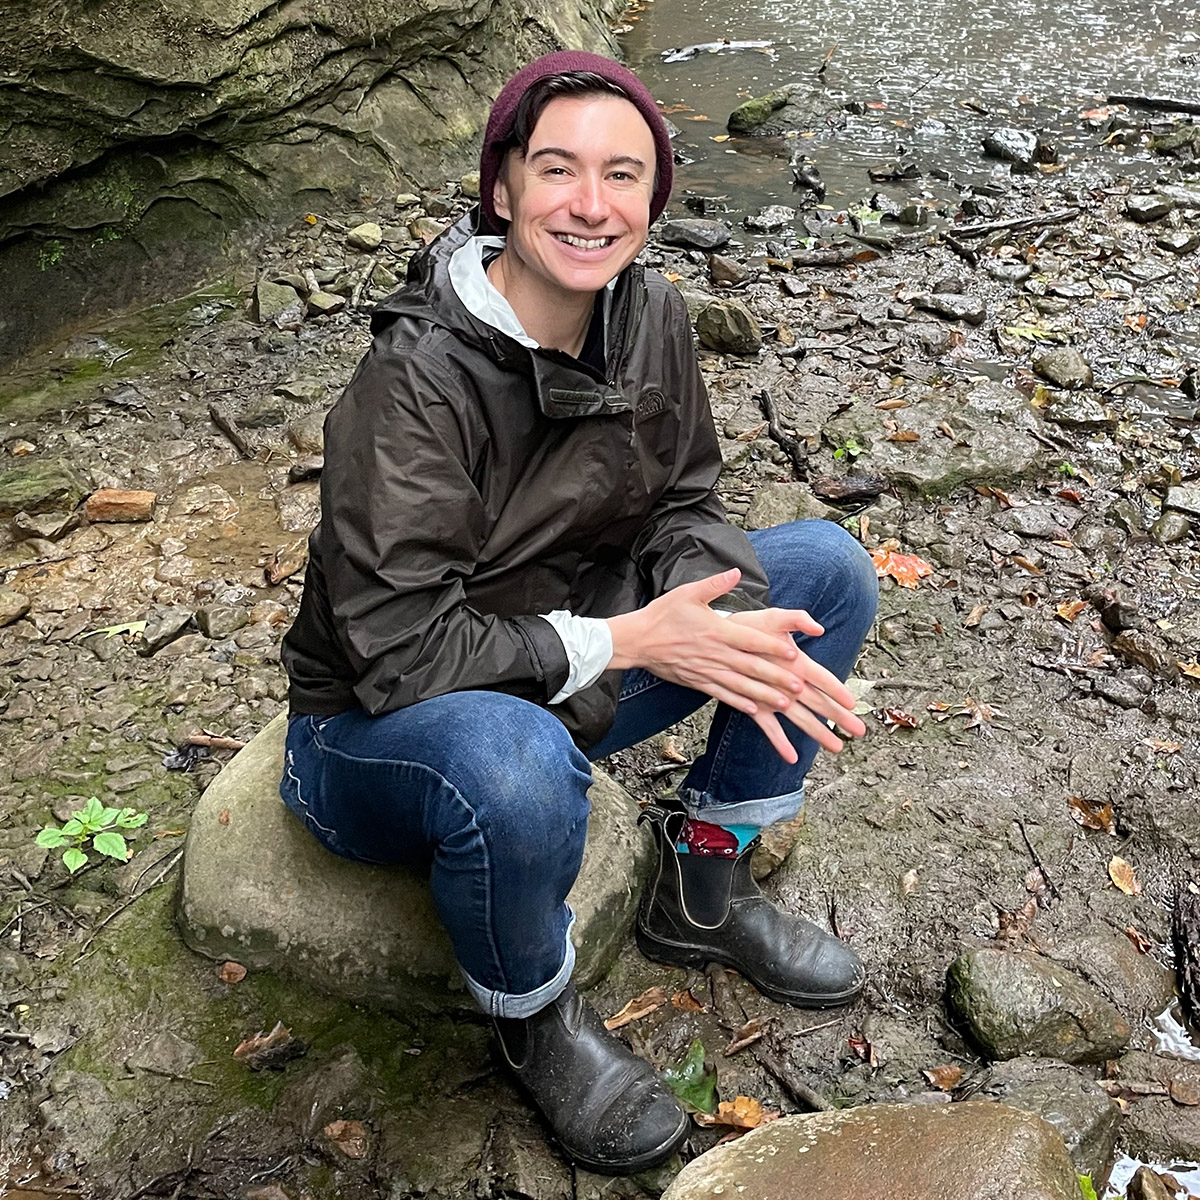 Jay is sitting on a grey green rock, surrounded by a rock formation with gray, orange and green tones. Jay's smiling face is looking towards the camera, wearing a maroon wool hat and a green raincoat with jeans. They are light-skinned, with dark eyebrows and short dark hair.